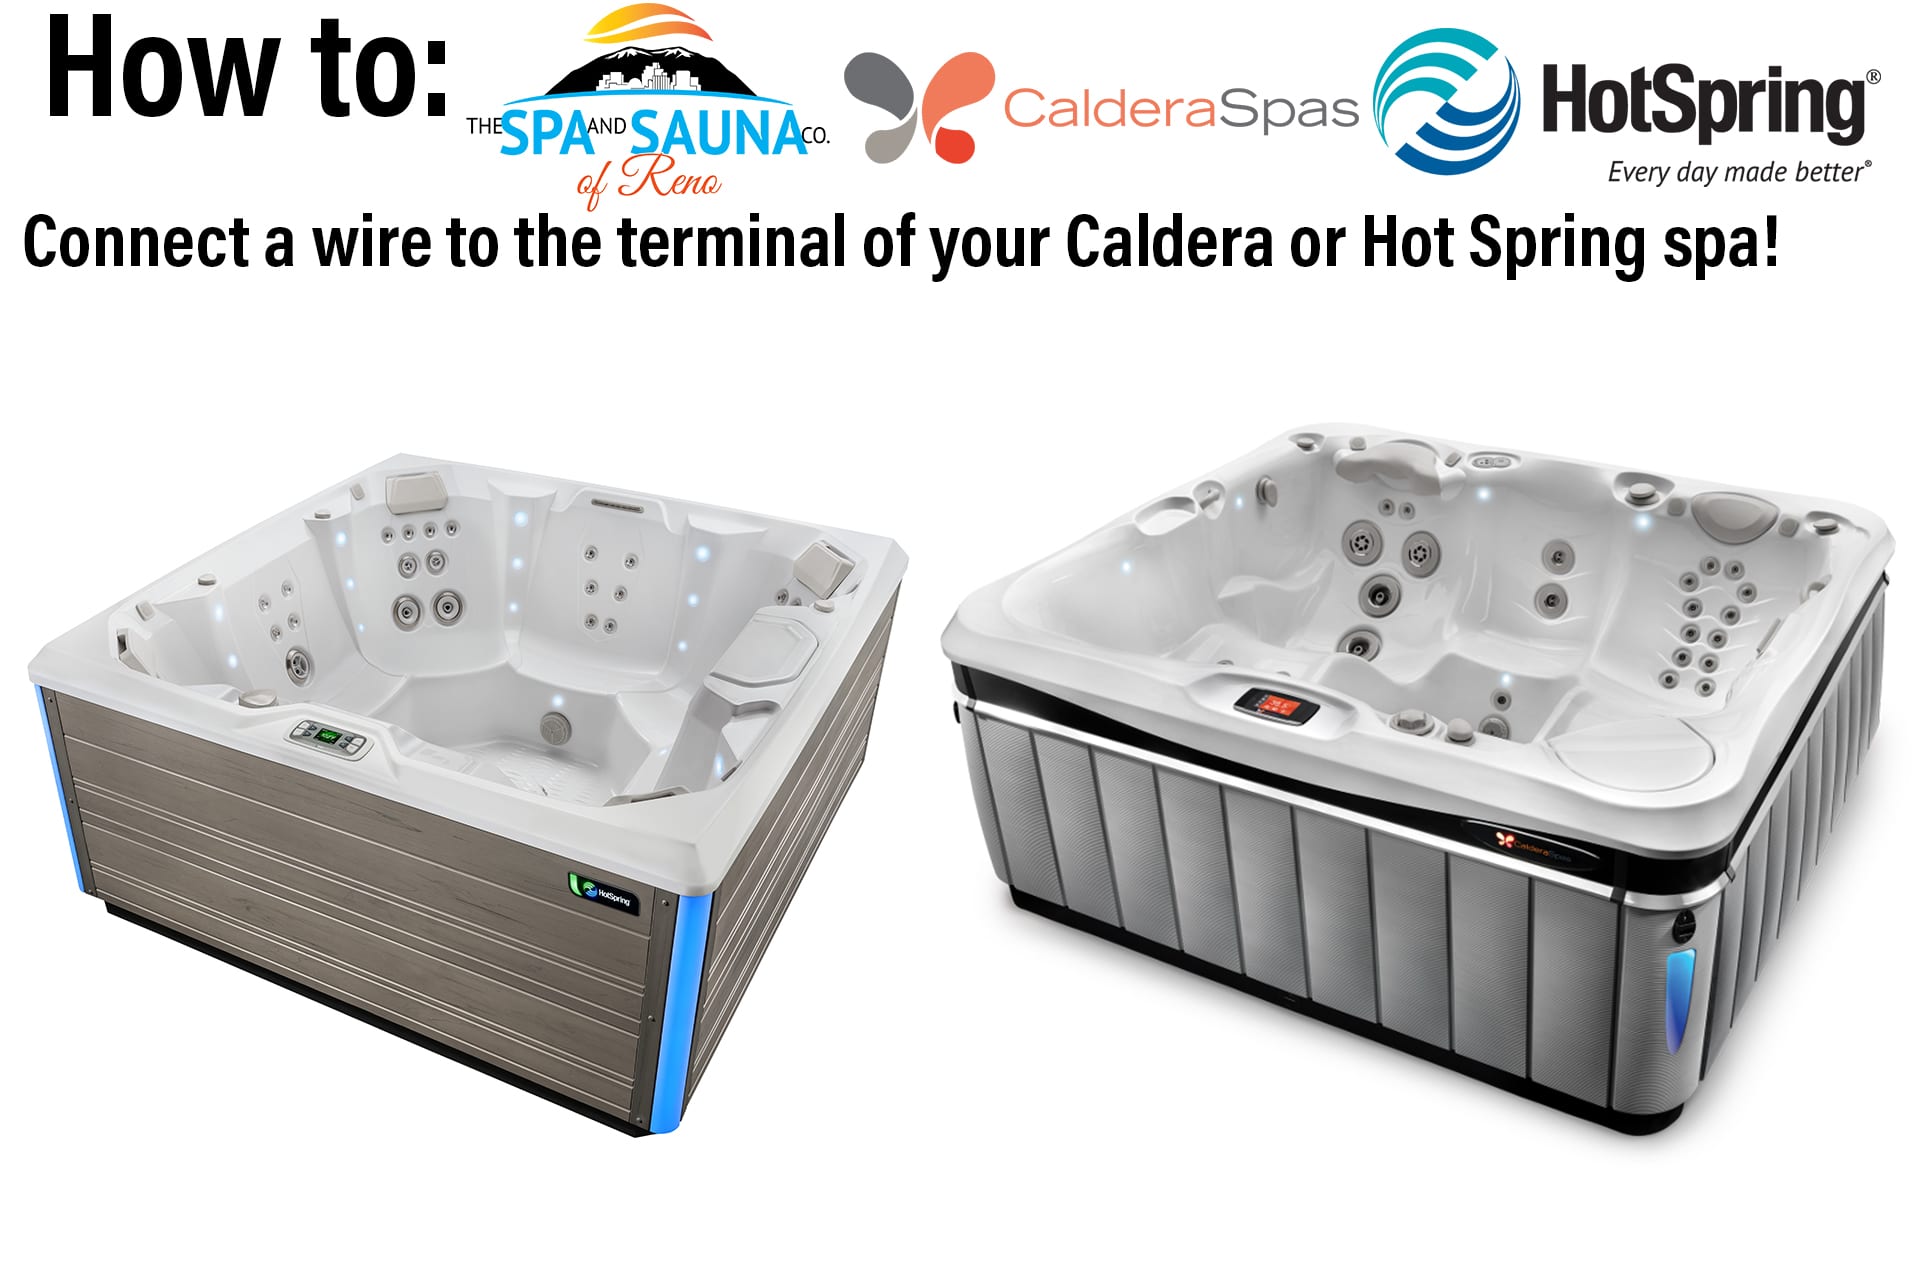 How to Connect Wires to the Terminal of Your Hot Spring or Caldera Spa